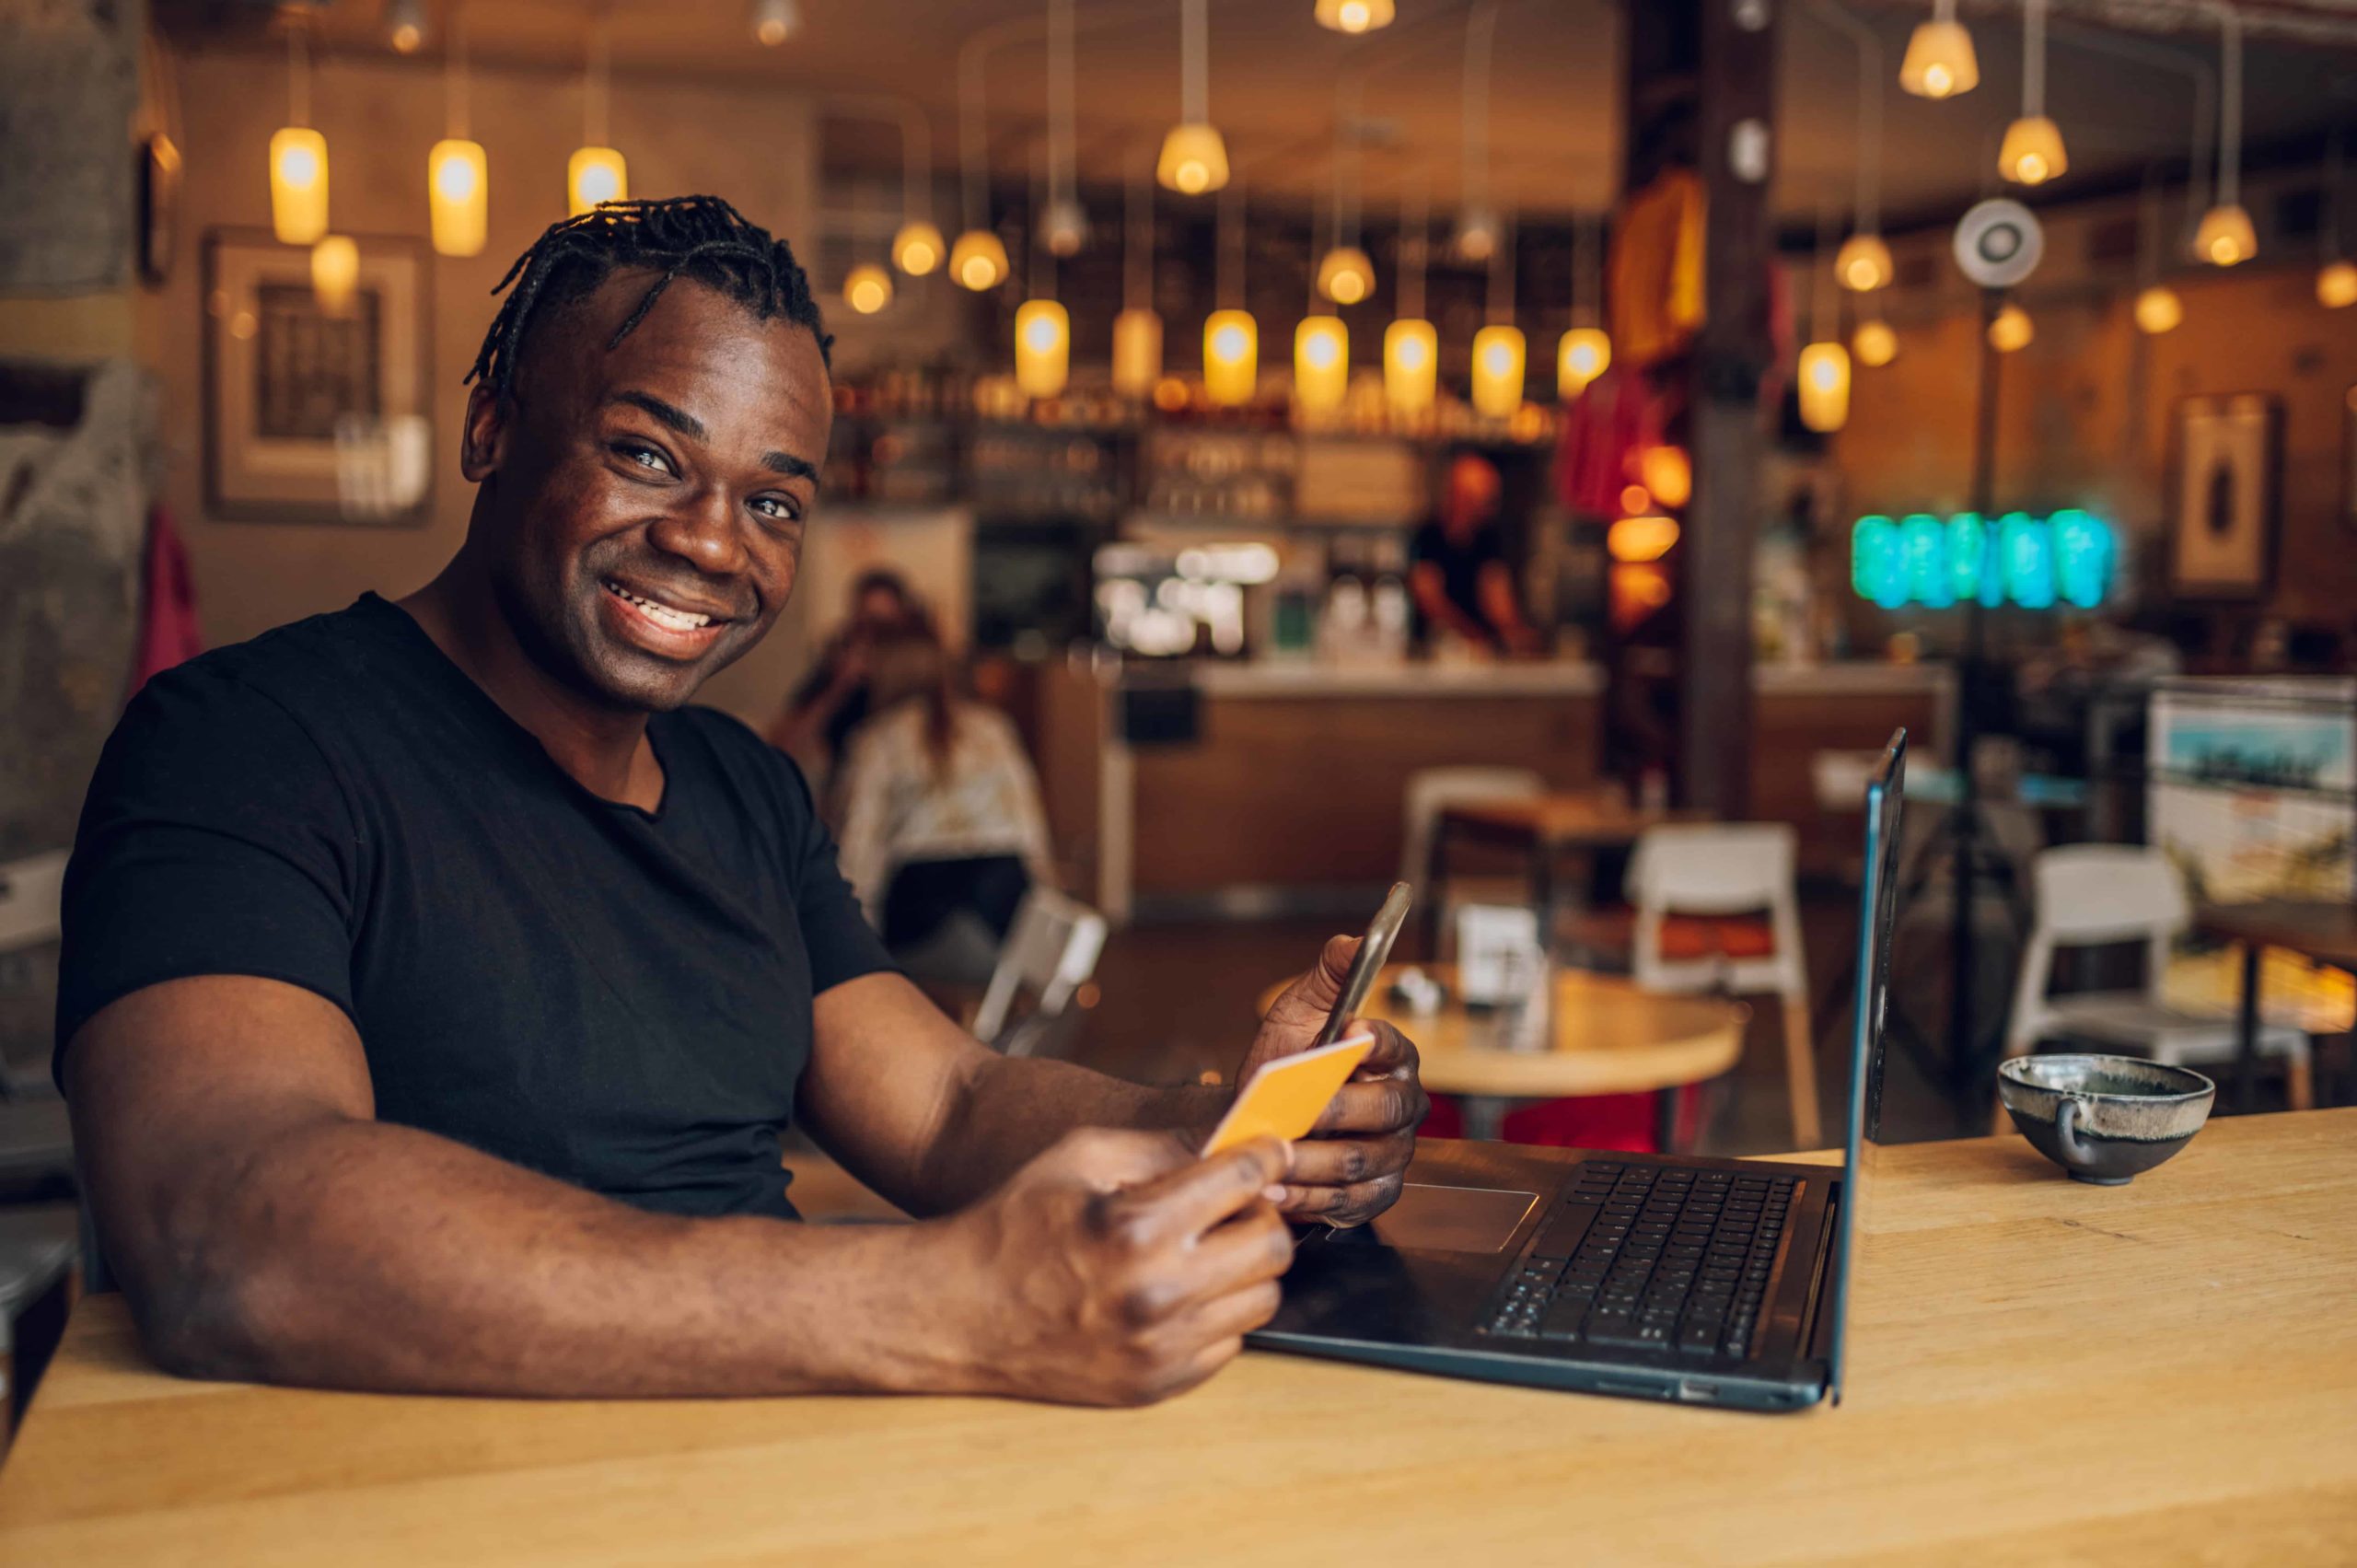 African american man using smartphone and credit card in a cafe